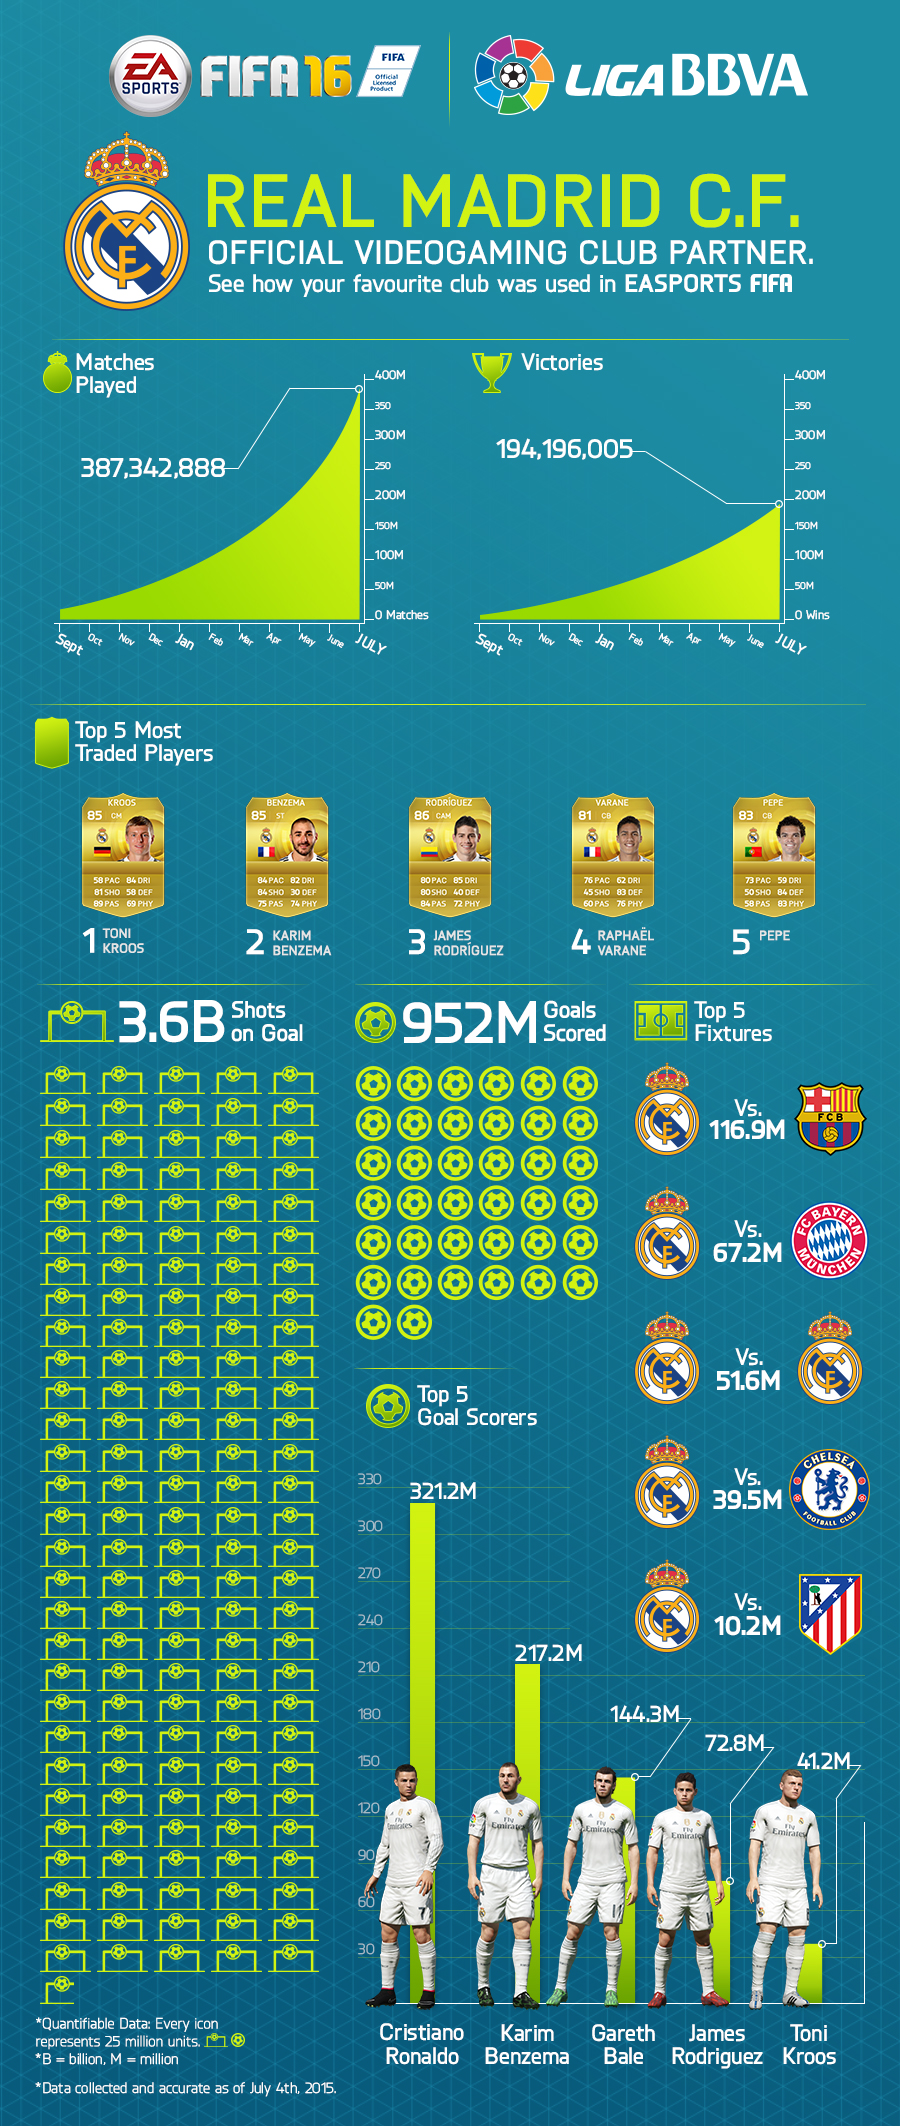 20150709_FIFA16_RealMadrid_Announce_INFOGRAPHIC_FINAL_b